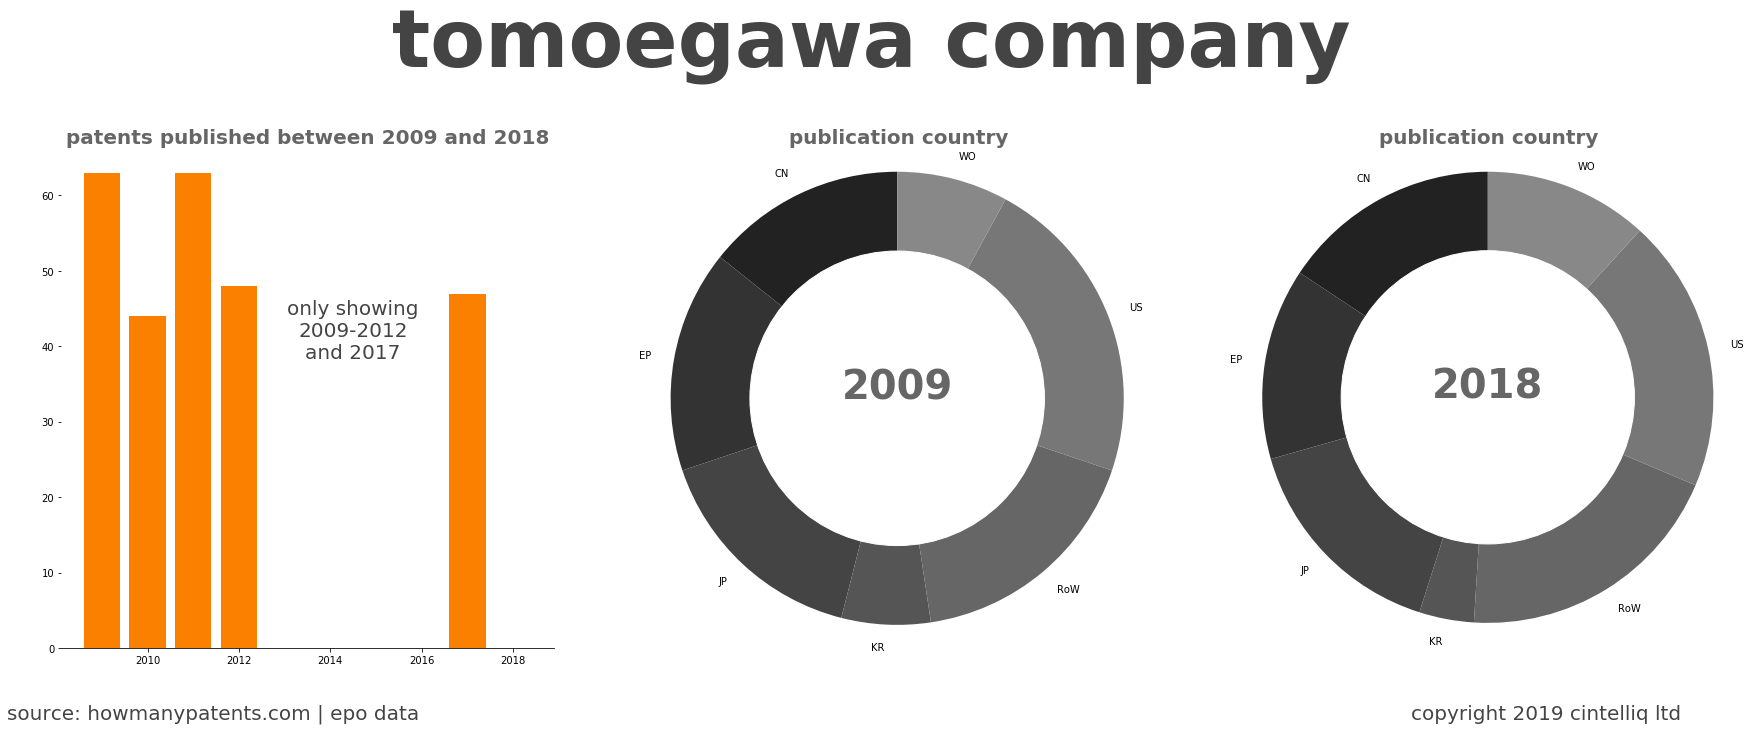 summary of patents for Tomoegawa Company